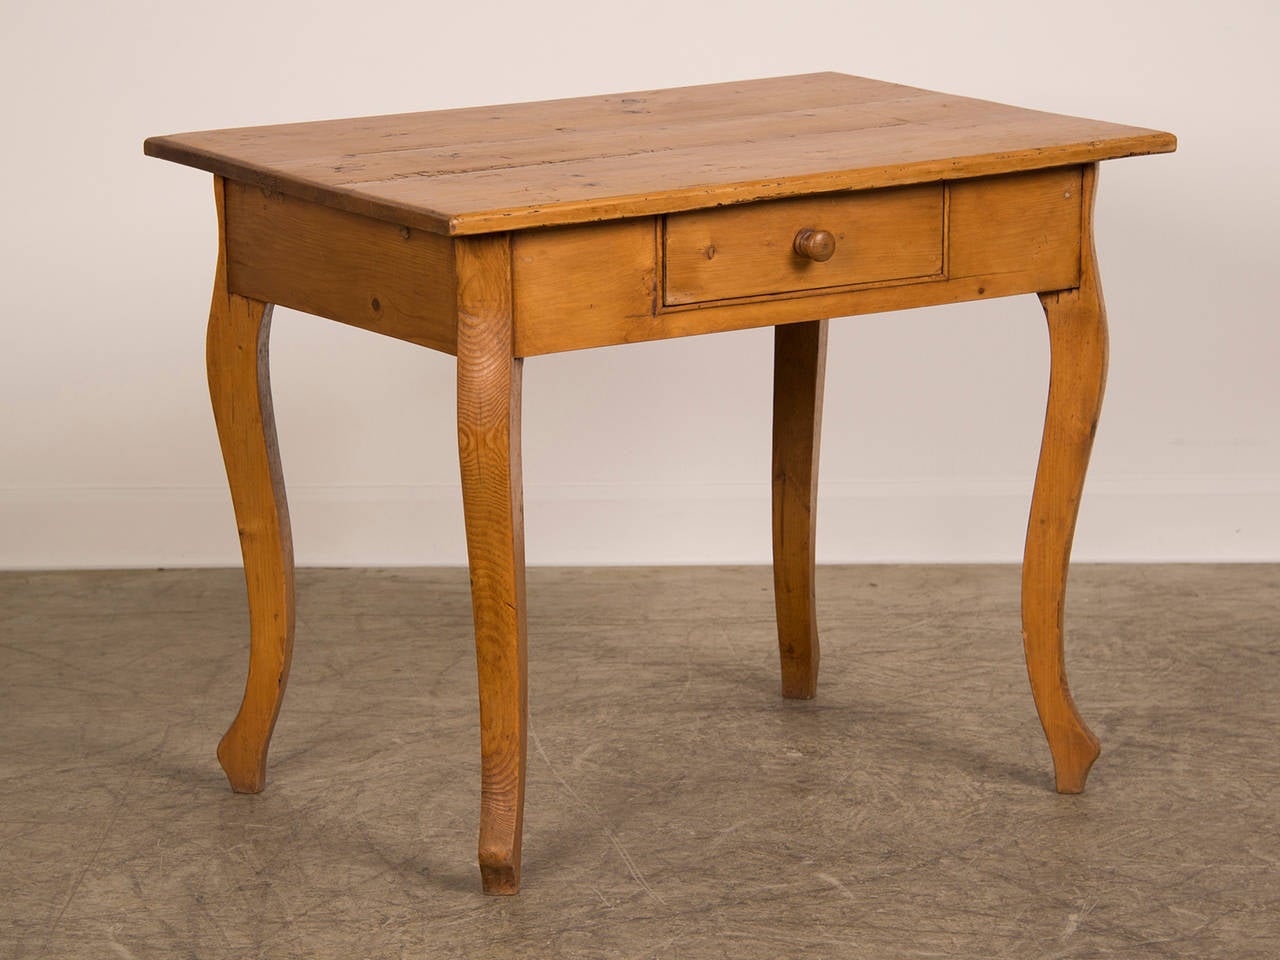 A large Louis XV style antique French pine table from France circa 1875. This table has a rectangular board top supported by four robust legs each having a simple cabriole profile. Unusually each of the four legs is set at a fourty five degree angle